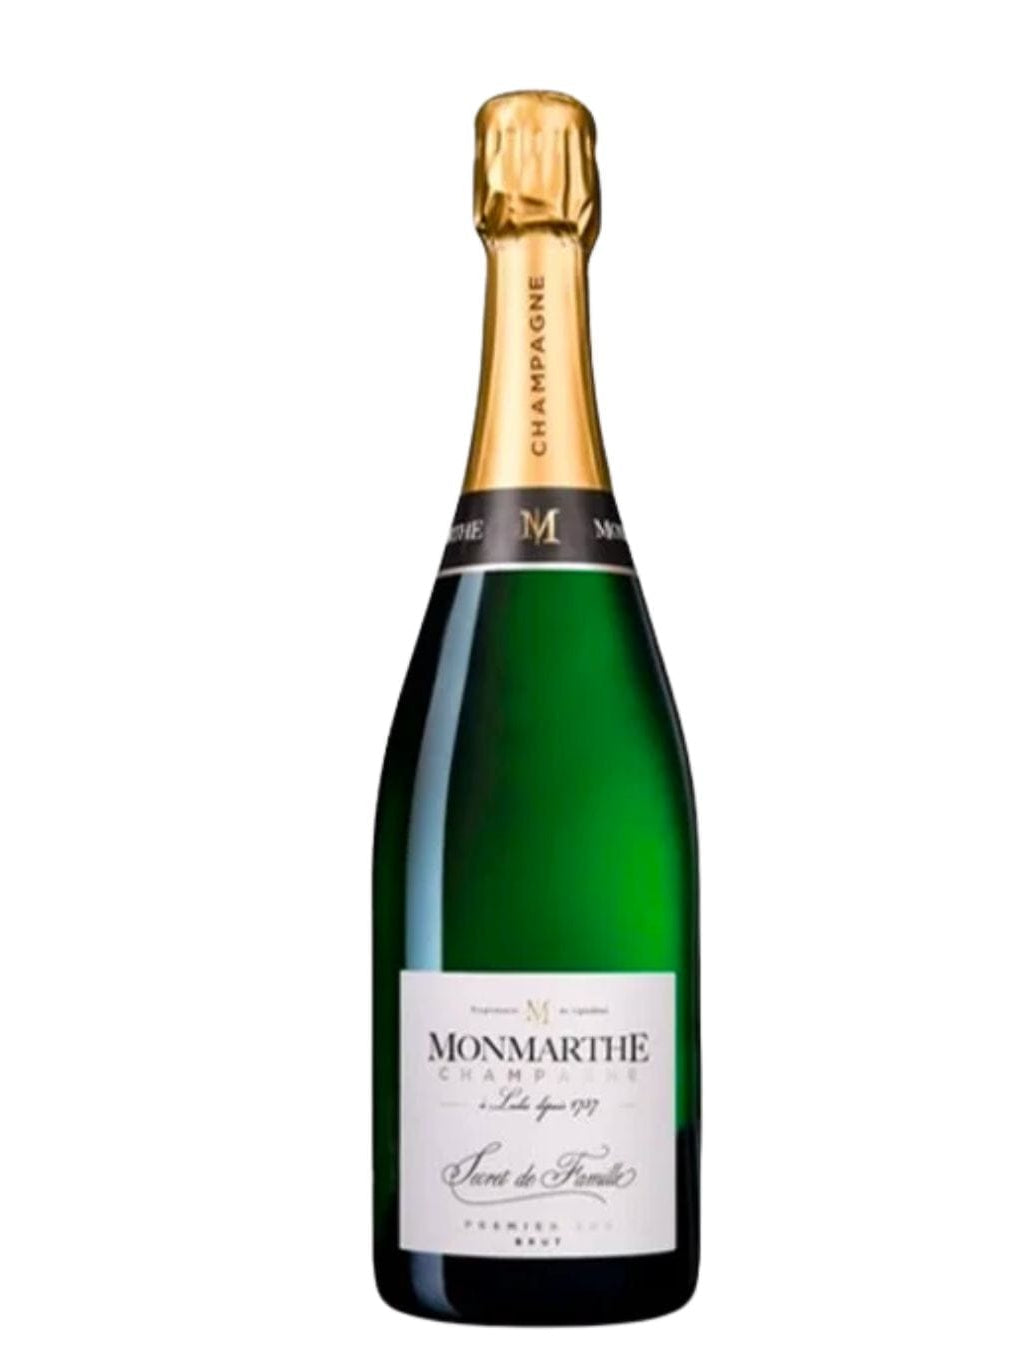 Shop Champagne Maison Monmarthe Champagne Maison Monmarthe Secret de Famille Brut NV online at PENTICTON artisanal French wine store in Hong Kong. Discover other French wines, promotions, workshops and featured offers at pentictonpacific.com 